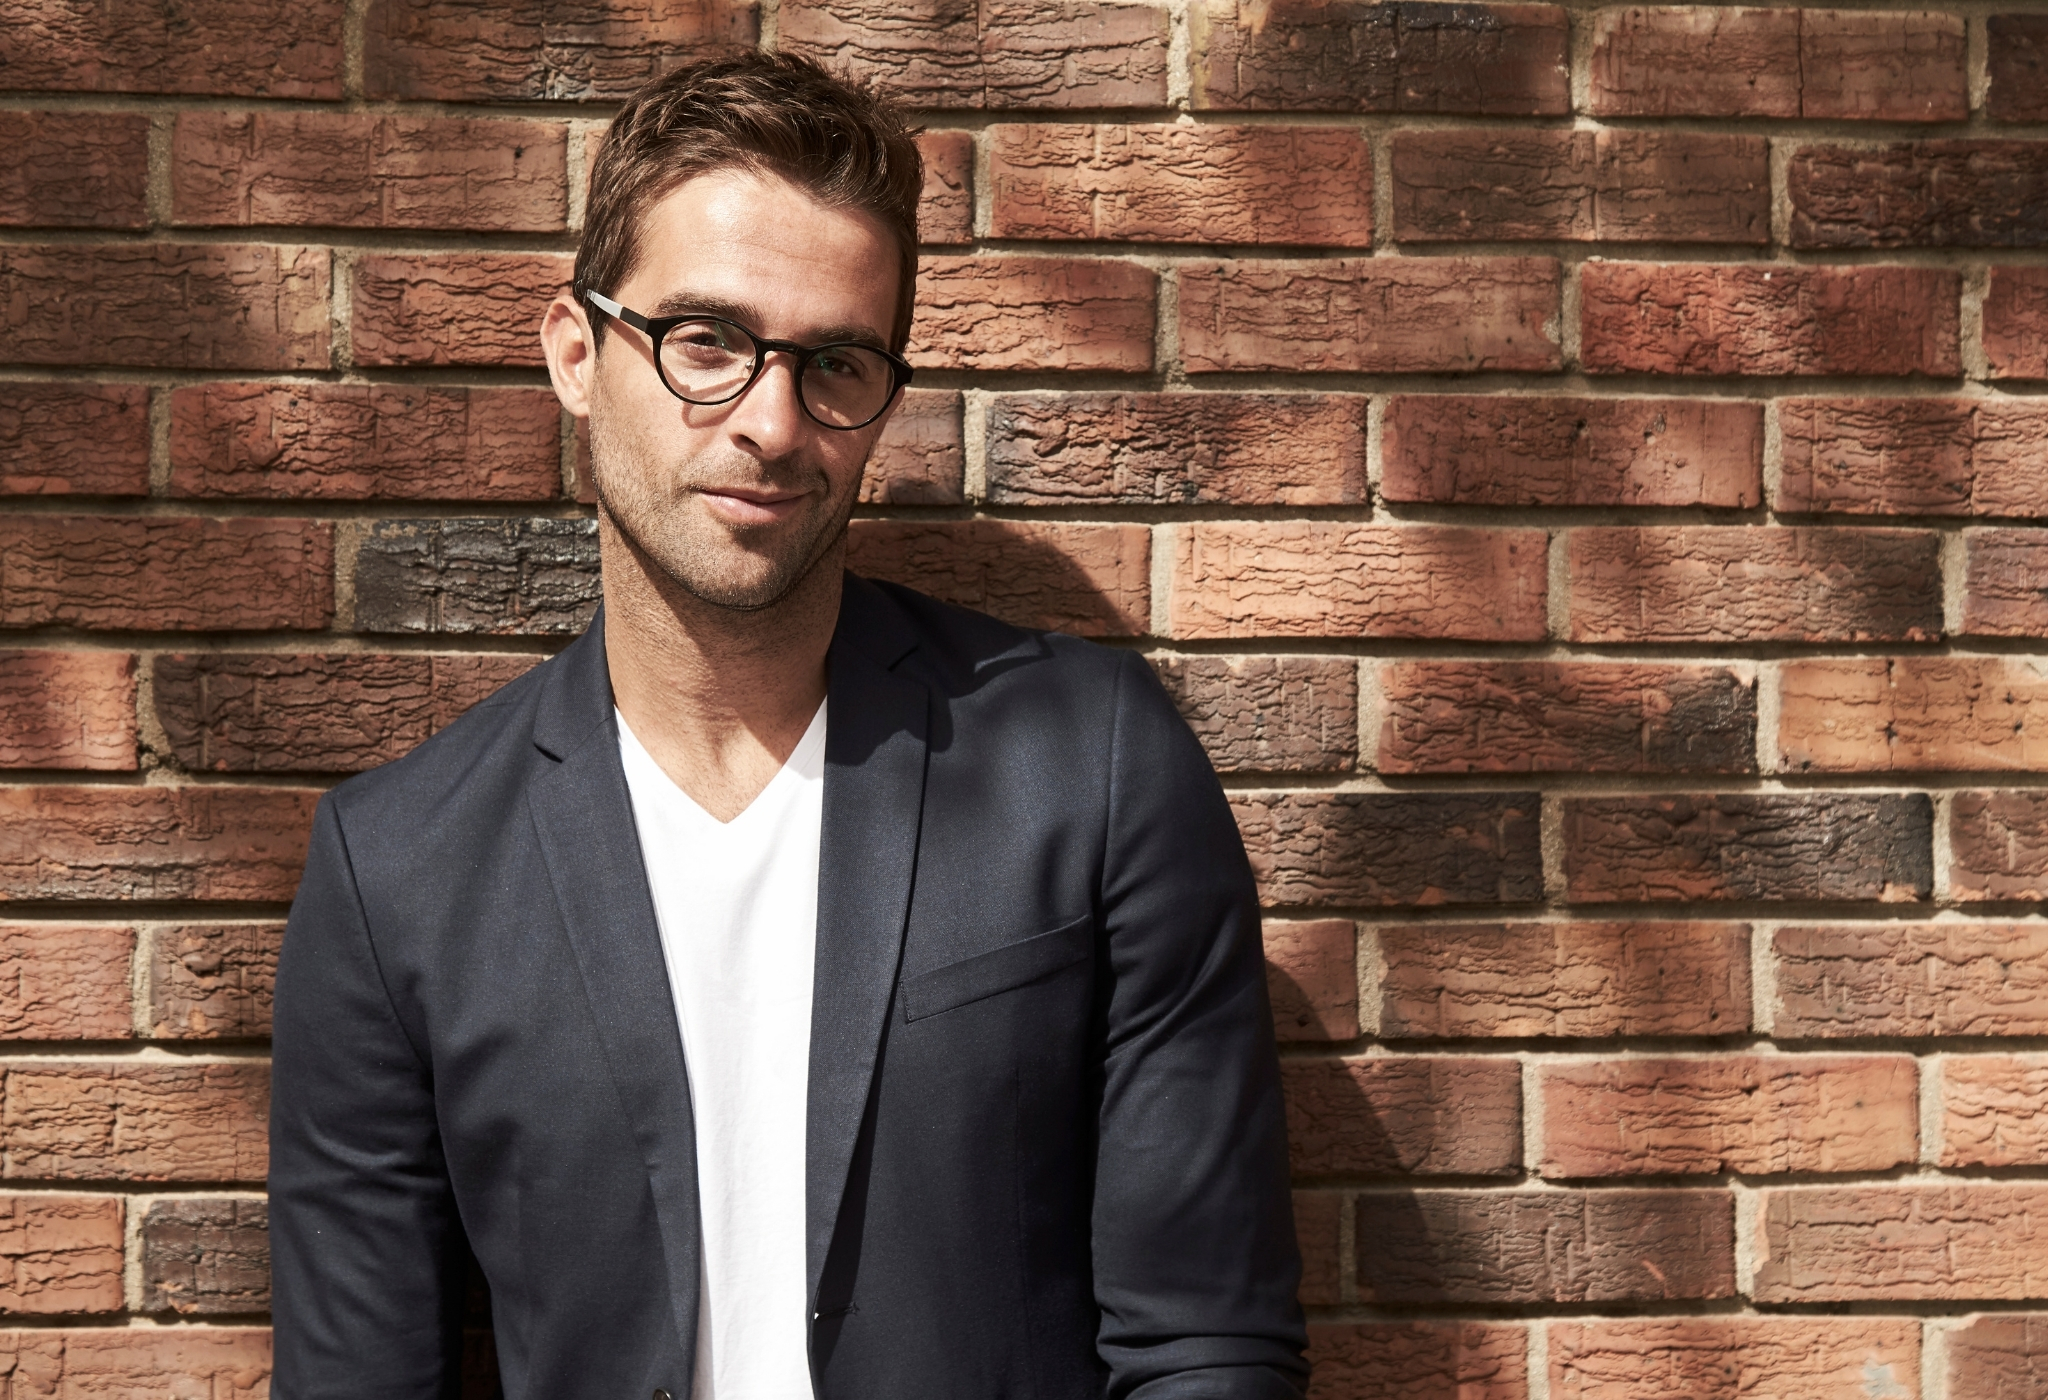 How To Buy The Right Eyeglasses Based On Your Face Shape | A Man's Guide To Wearing  Glasses